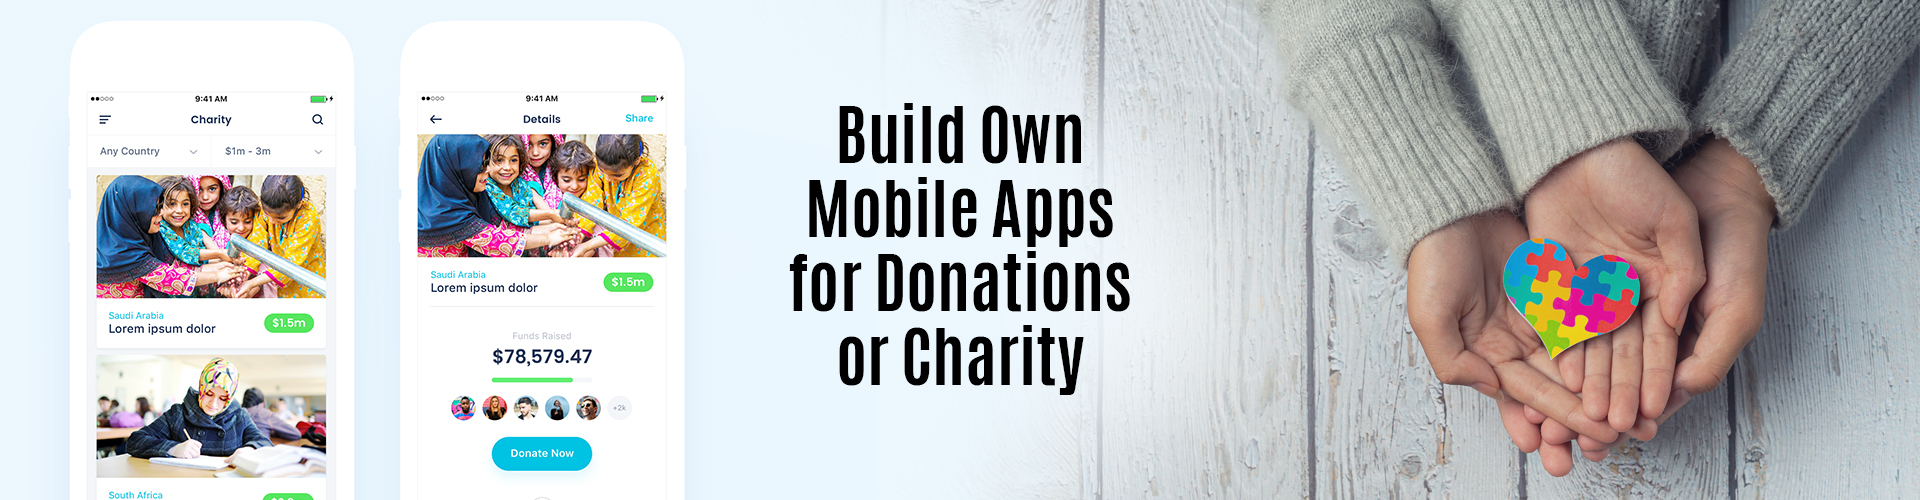 Charity Mobile App Development Step By Step Guide To Develop App